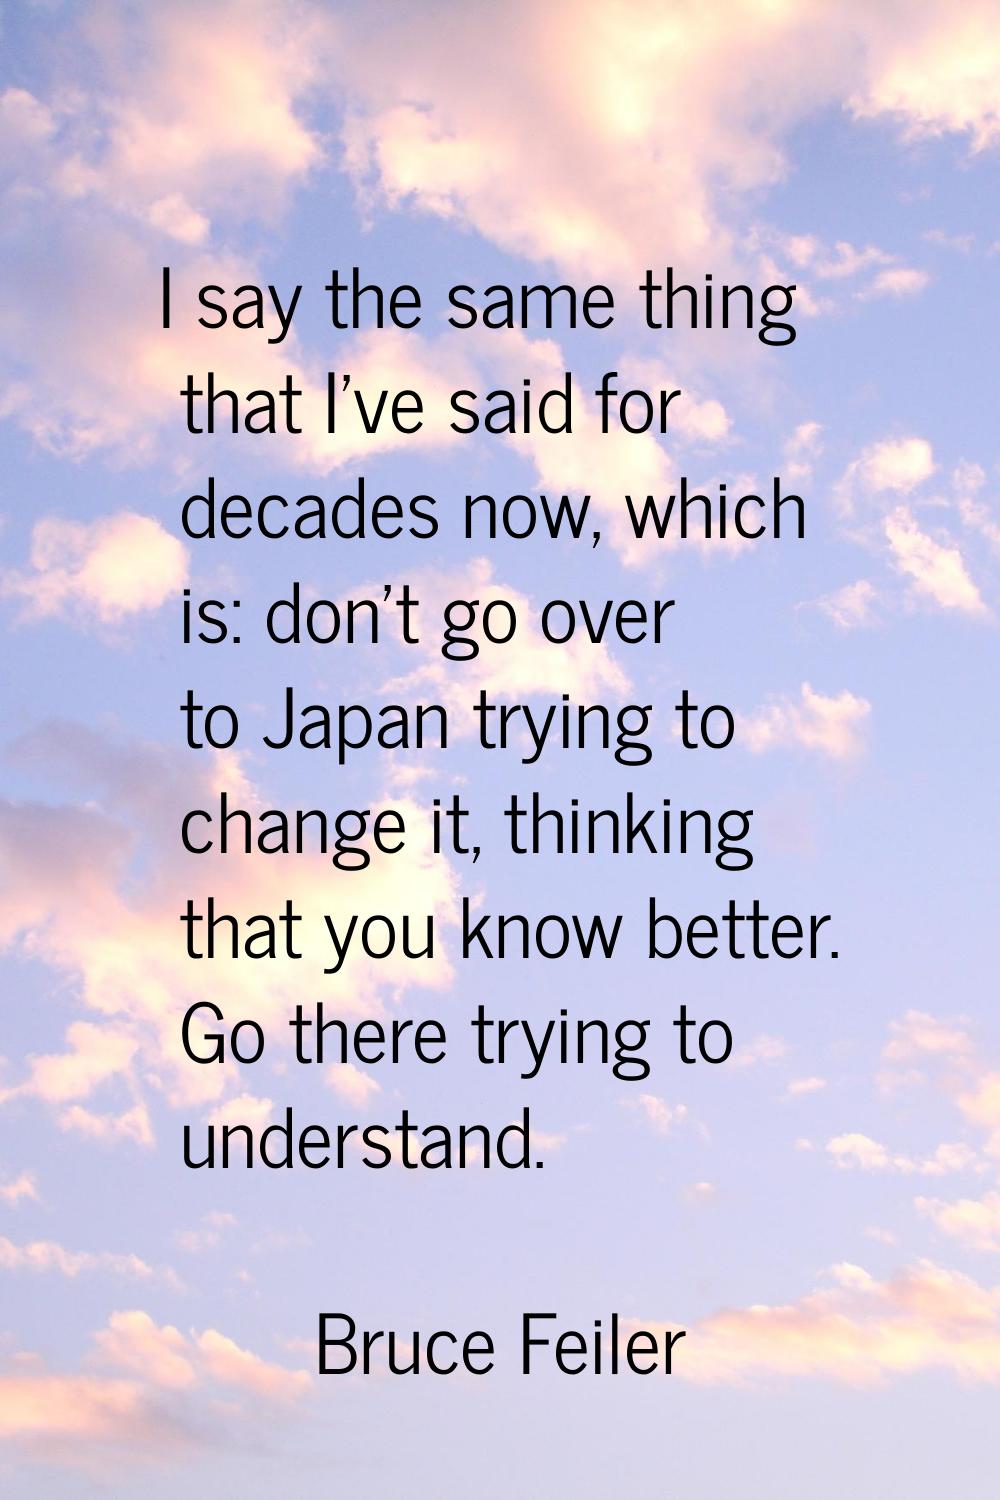 I say the same thing that I've said for decades now, which is: don't go over to Japan trying to cha